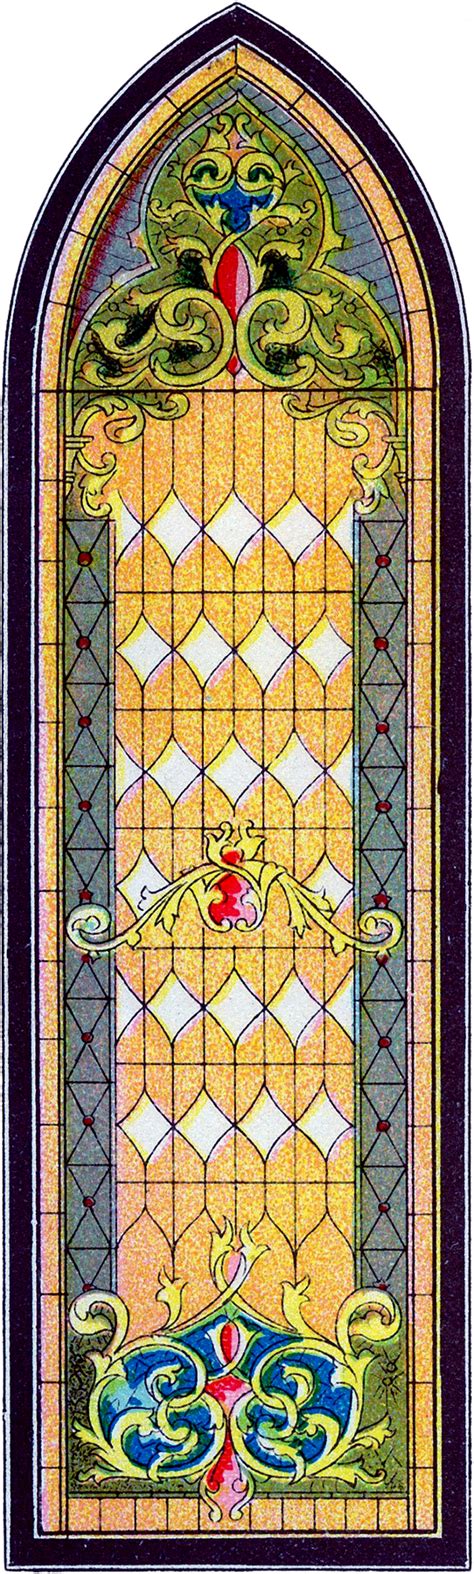 Vintage Stained Glass Church Window Image The Graphics